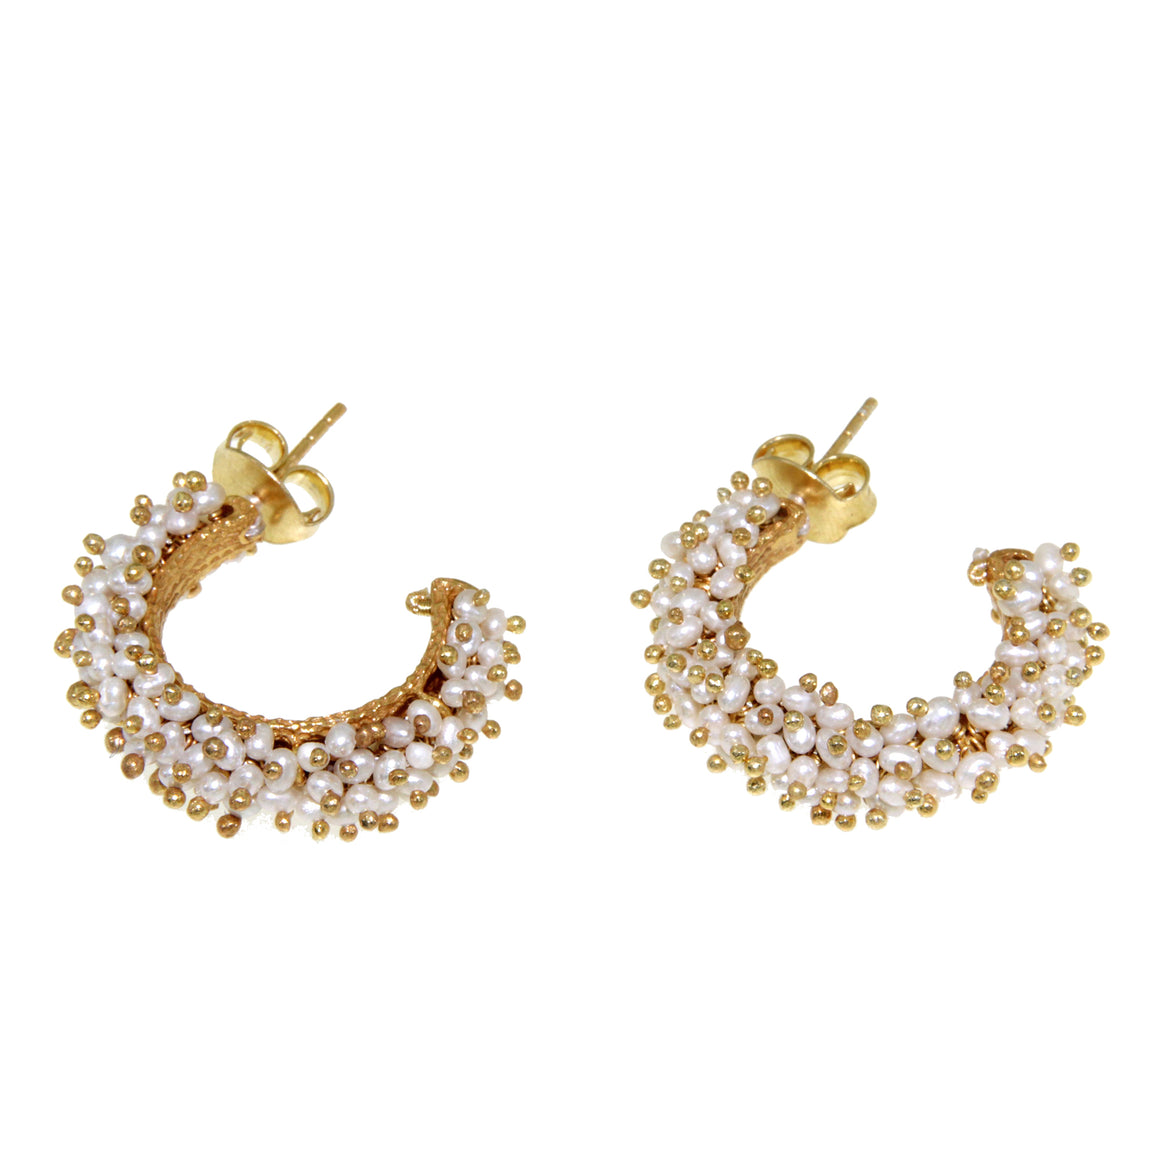 Dreamy Cluster of Pearls & Gold Beads